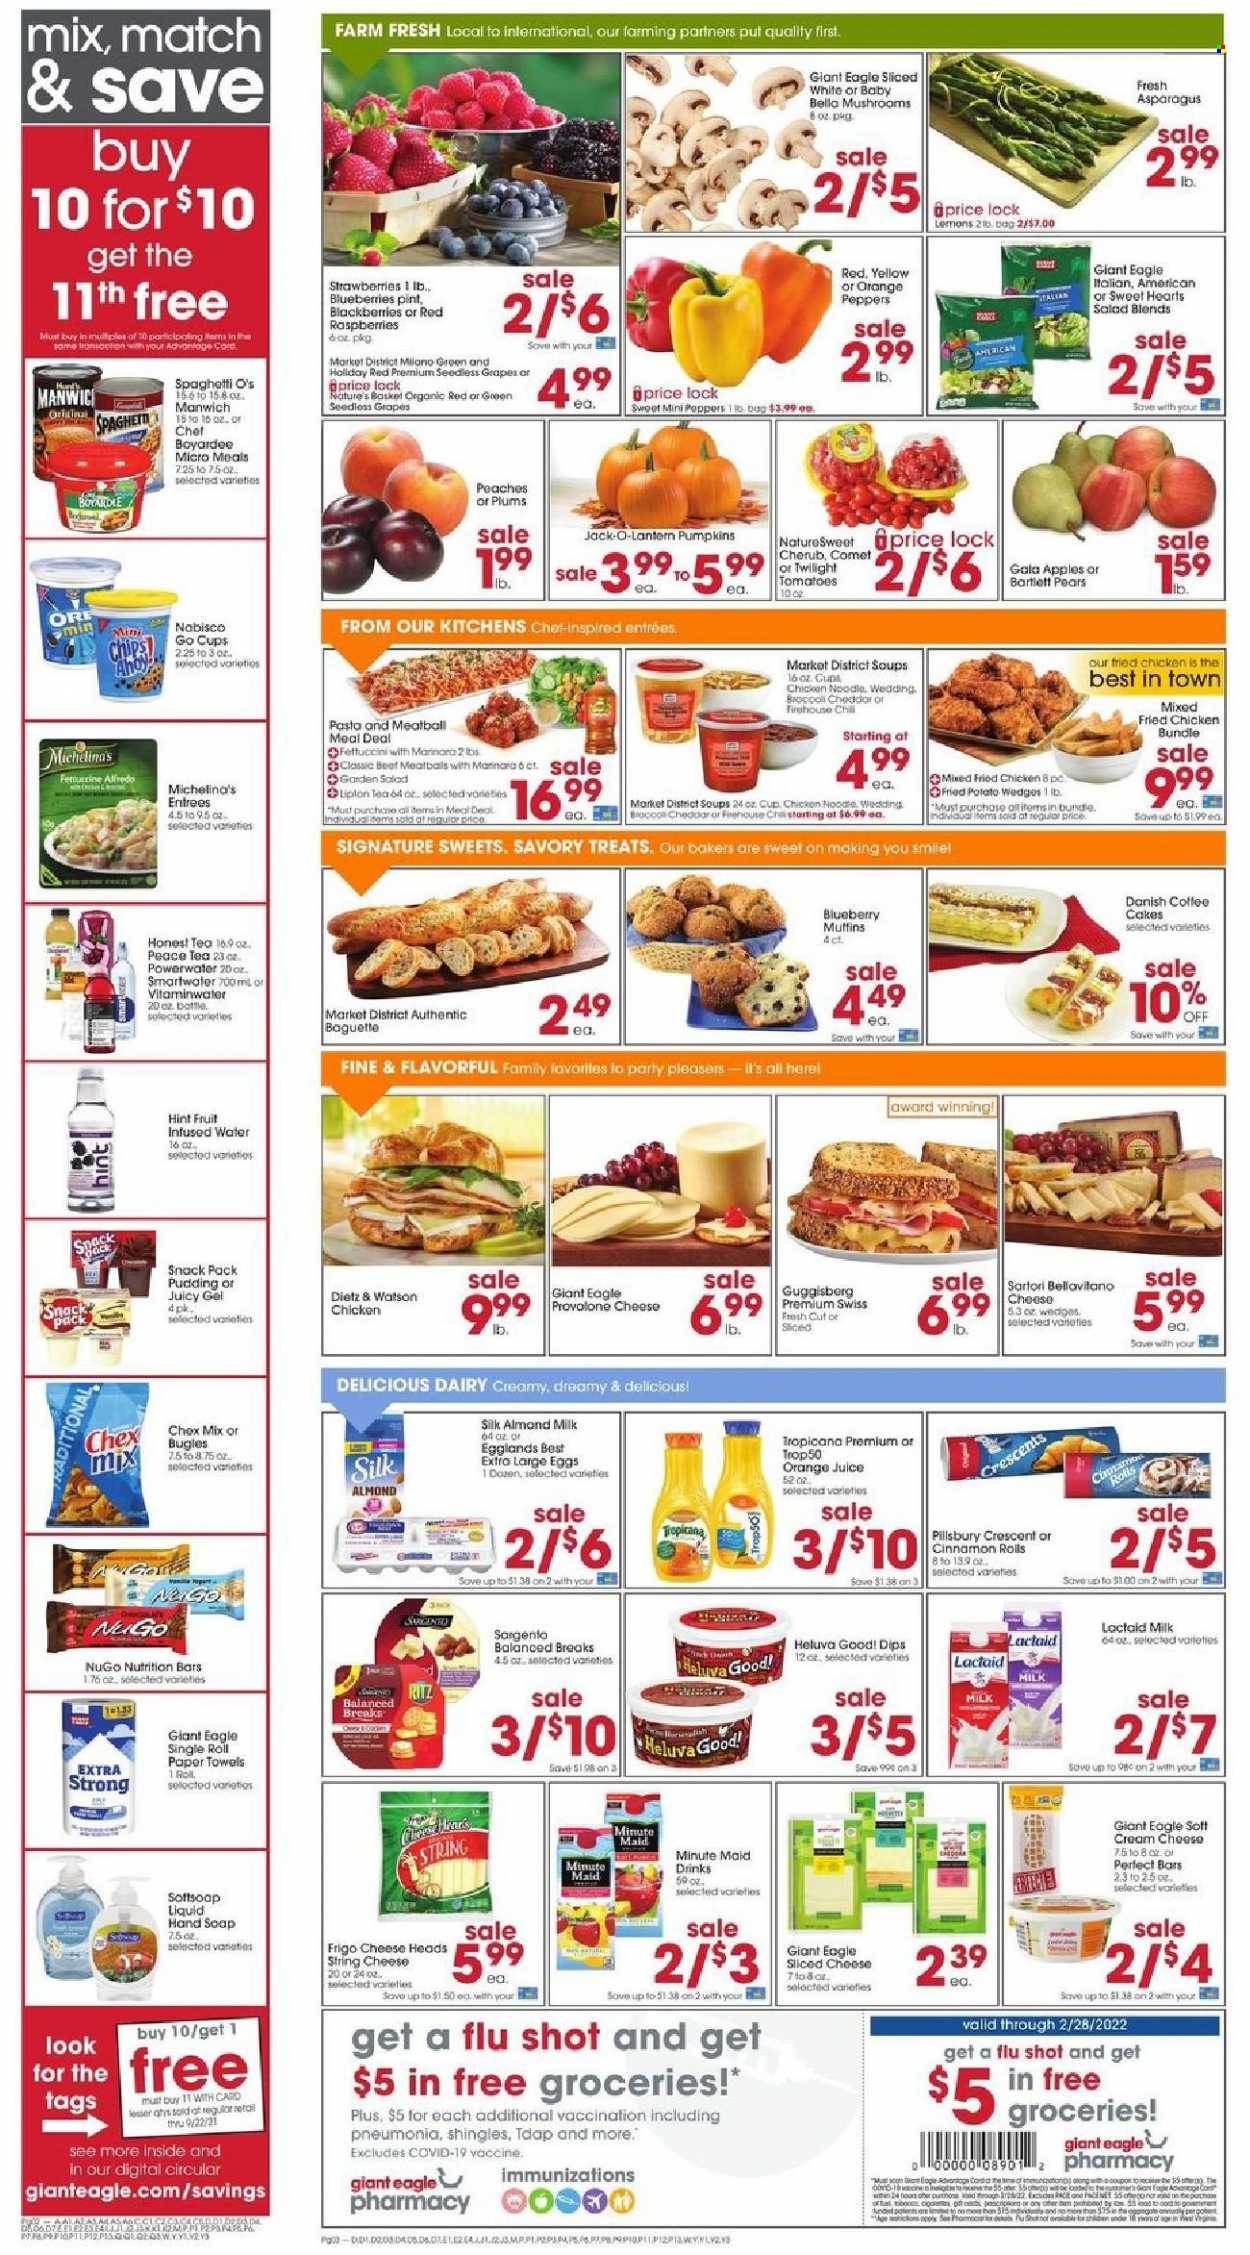 thumbnail - Giant Eagle Flyer - 09/16/2021 - 09/22/2021 - Sales products - mushrooms, Bartlett pears, seedless grapes, plums, baguette, cake, cinnamon roll, asparagus, pumpkin, salad, peppers, apples, blackberries, blueberries, Gala, grapes, strawberries, pears, spaghetti, pasta, fried chicken, Pillsbury, noodles, Dietz & Watson, cream cheese, Lactaid, sliced cheese, string cheese, cheese, Provolone, Sargento, BellaVitano, pudding, milk, Silk, large eggs, potato wedges, RITZ, Chex Mix, Manwich, nutrition bar, orange juice, juice, fruit punch, Smartwater, tea, gin, beer, kitchen towels, paper towels, Softsoap, hand soap, soap, basket, cup, Bakers, lemons, peaches. Page 2.